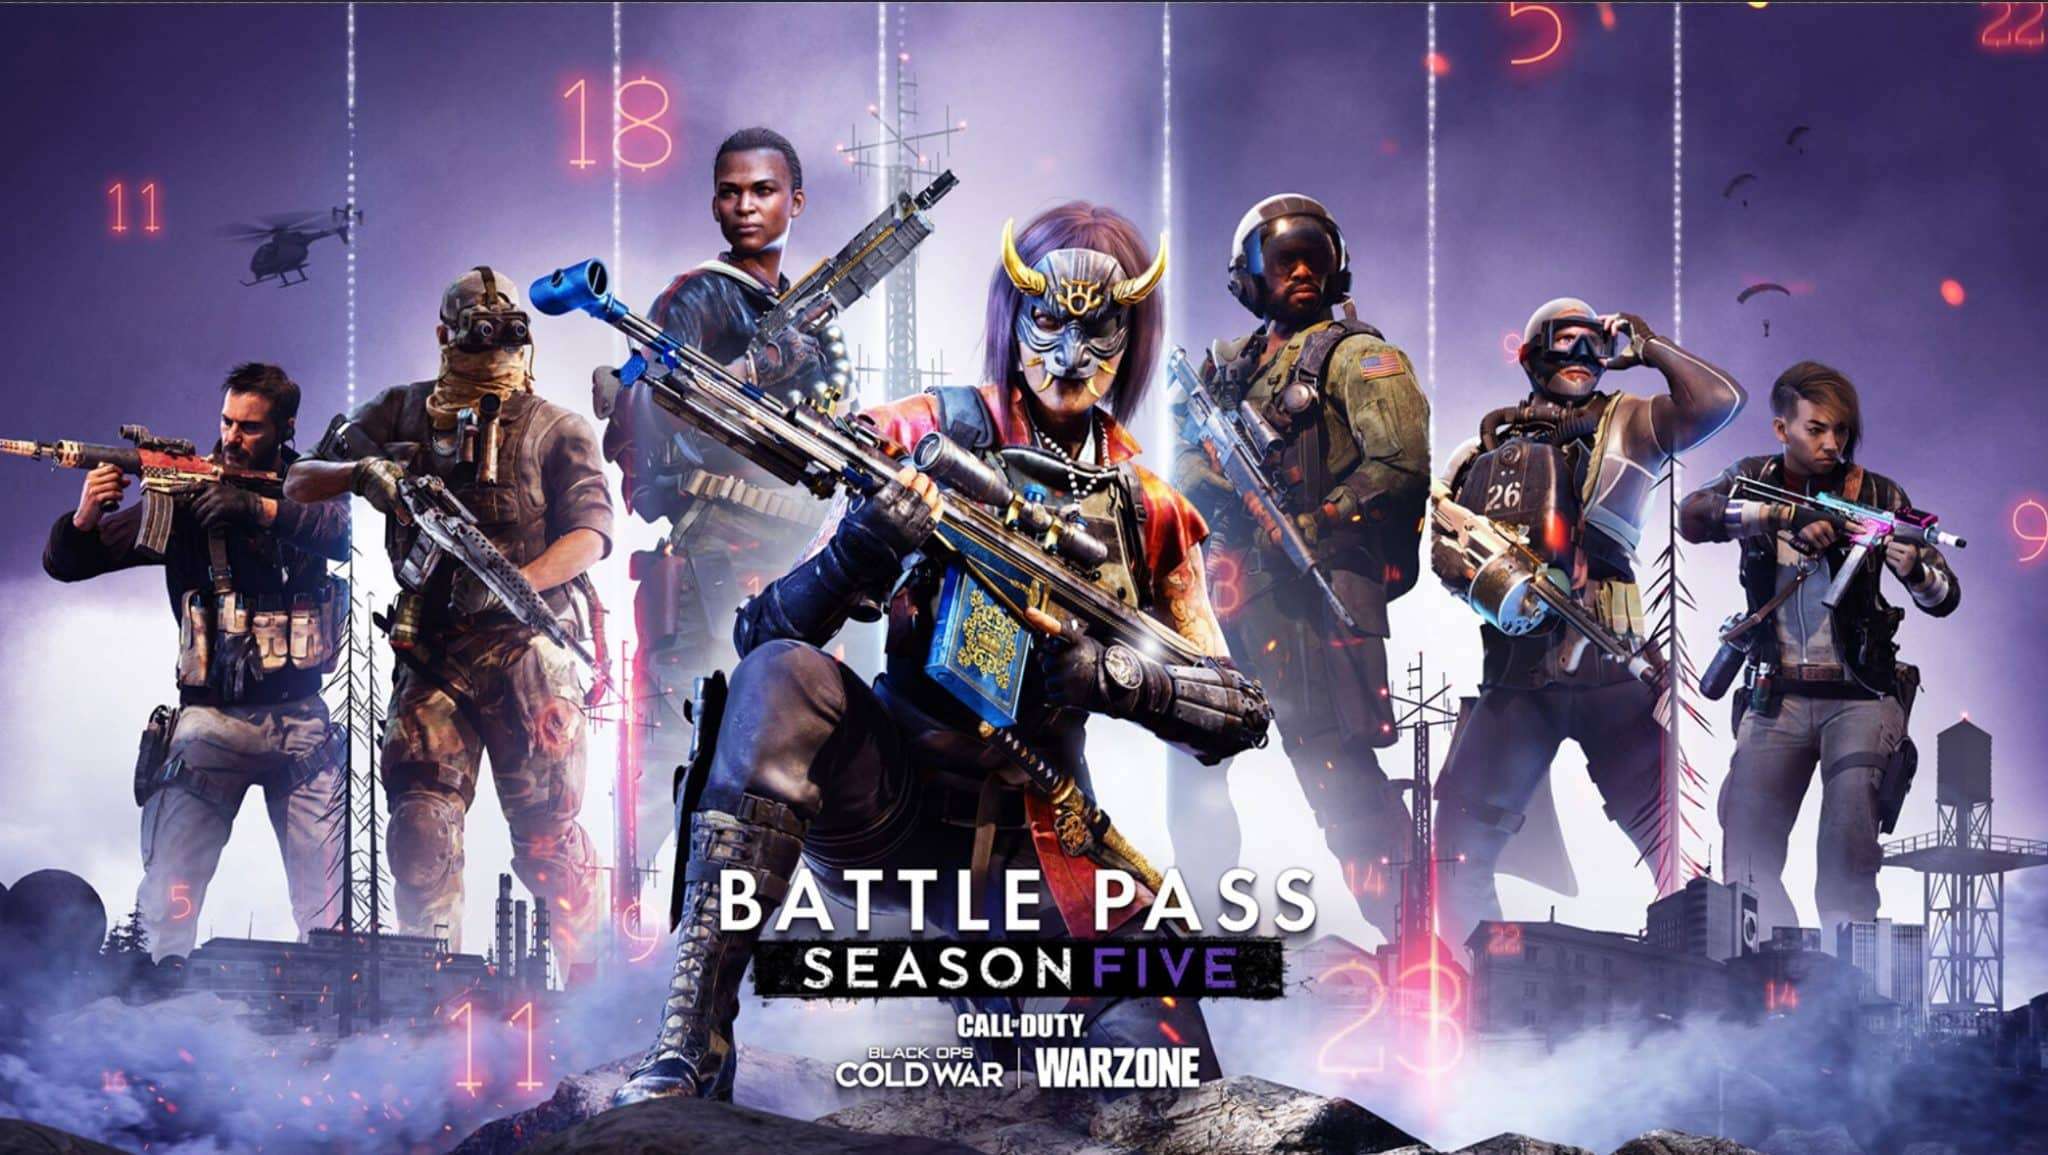 Warzone and Black Ops COld War Season 5 Battle Pass